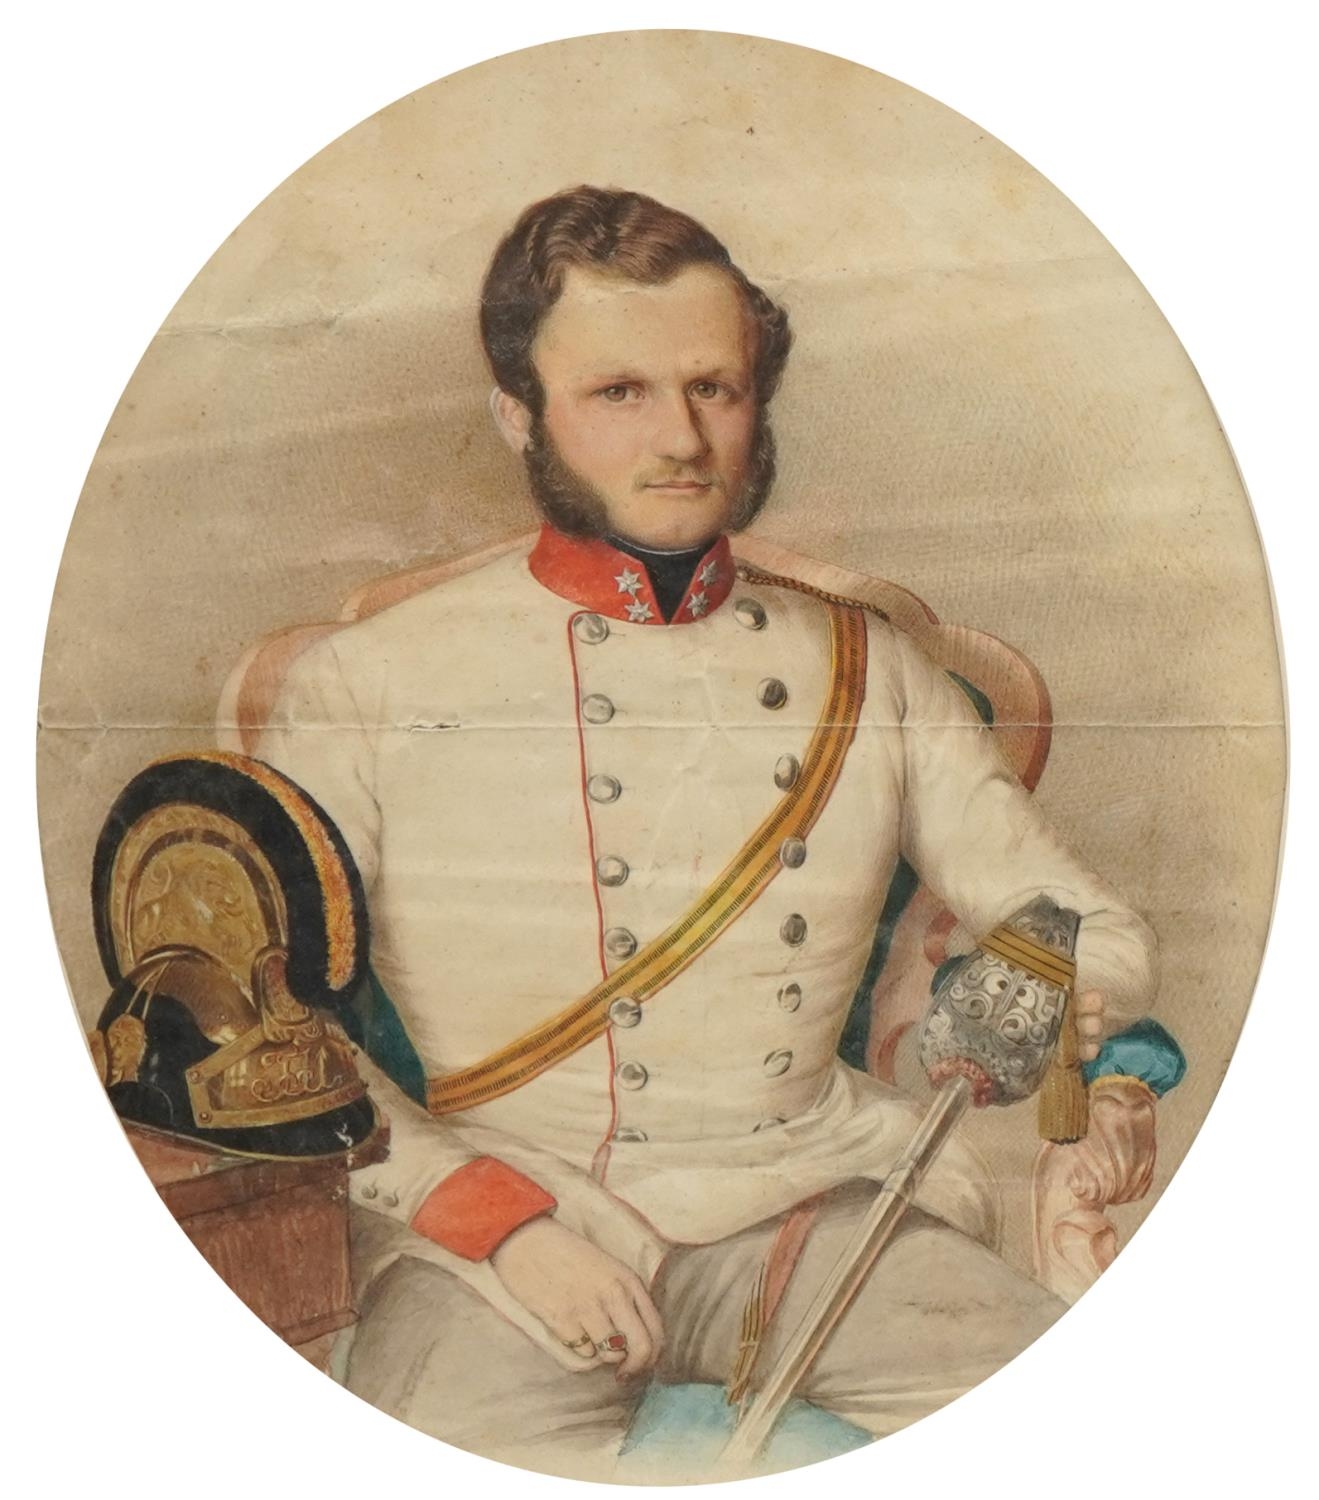 Top half portrait of a Prussian officer in military uniform, 19th century military interest